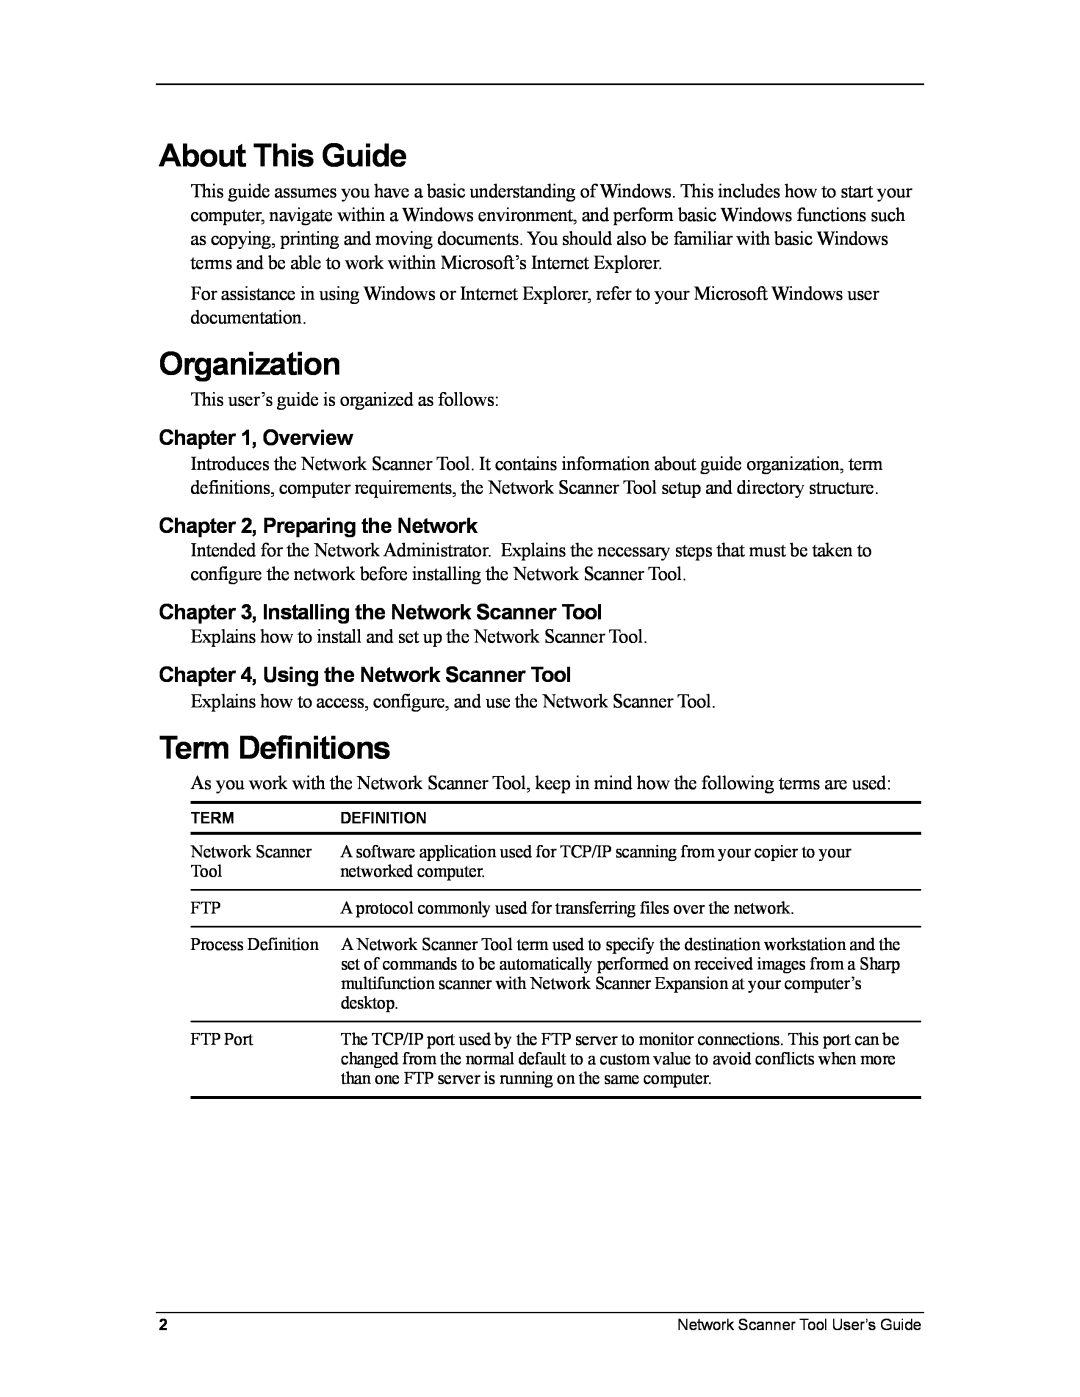 Sharp R3.1 manual About This Guide, Organization, Term Definitions, Overview, Preparing the Network 